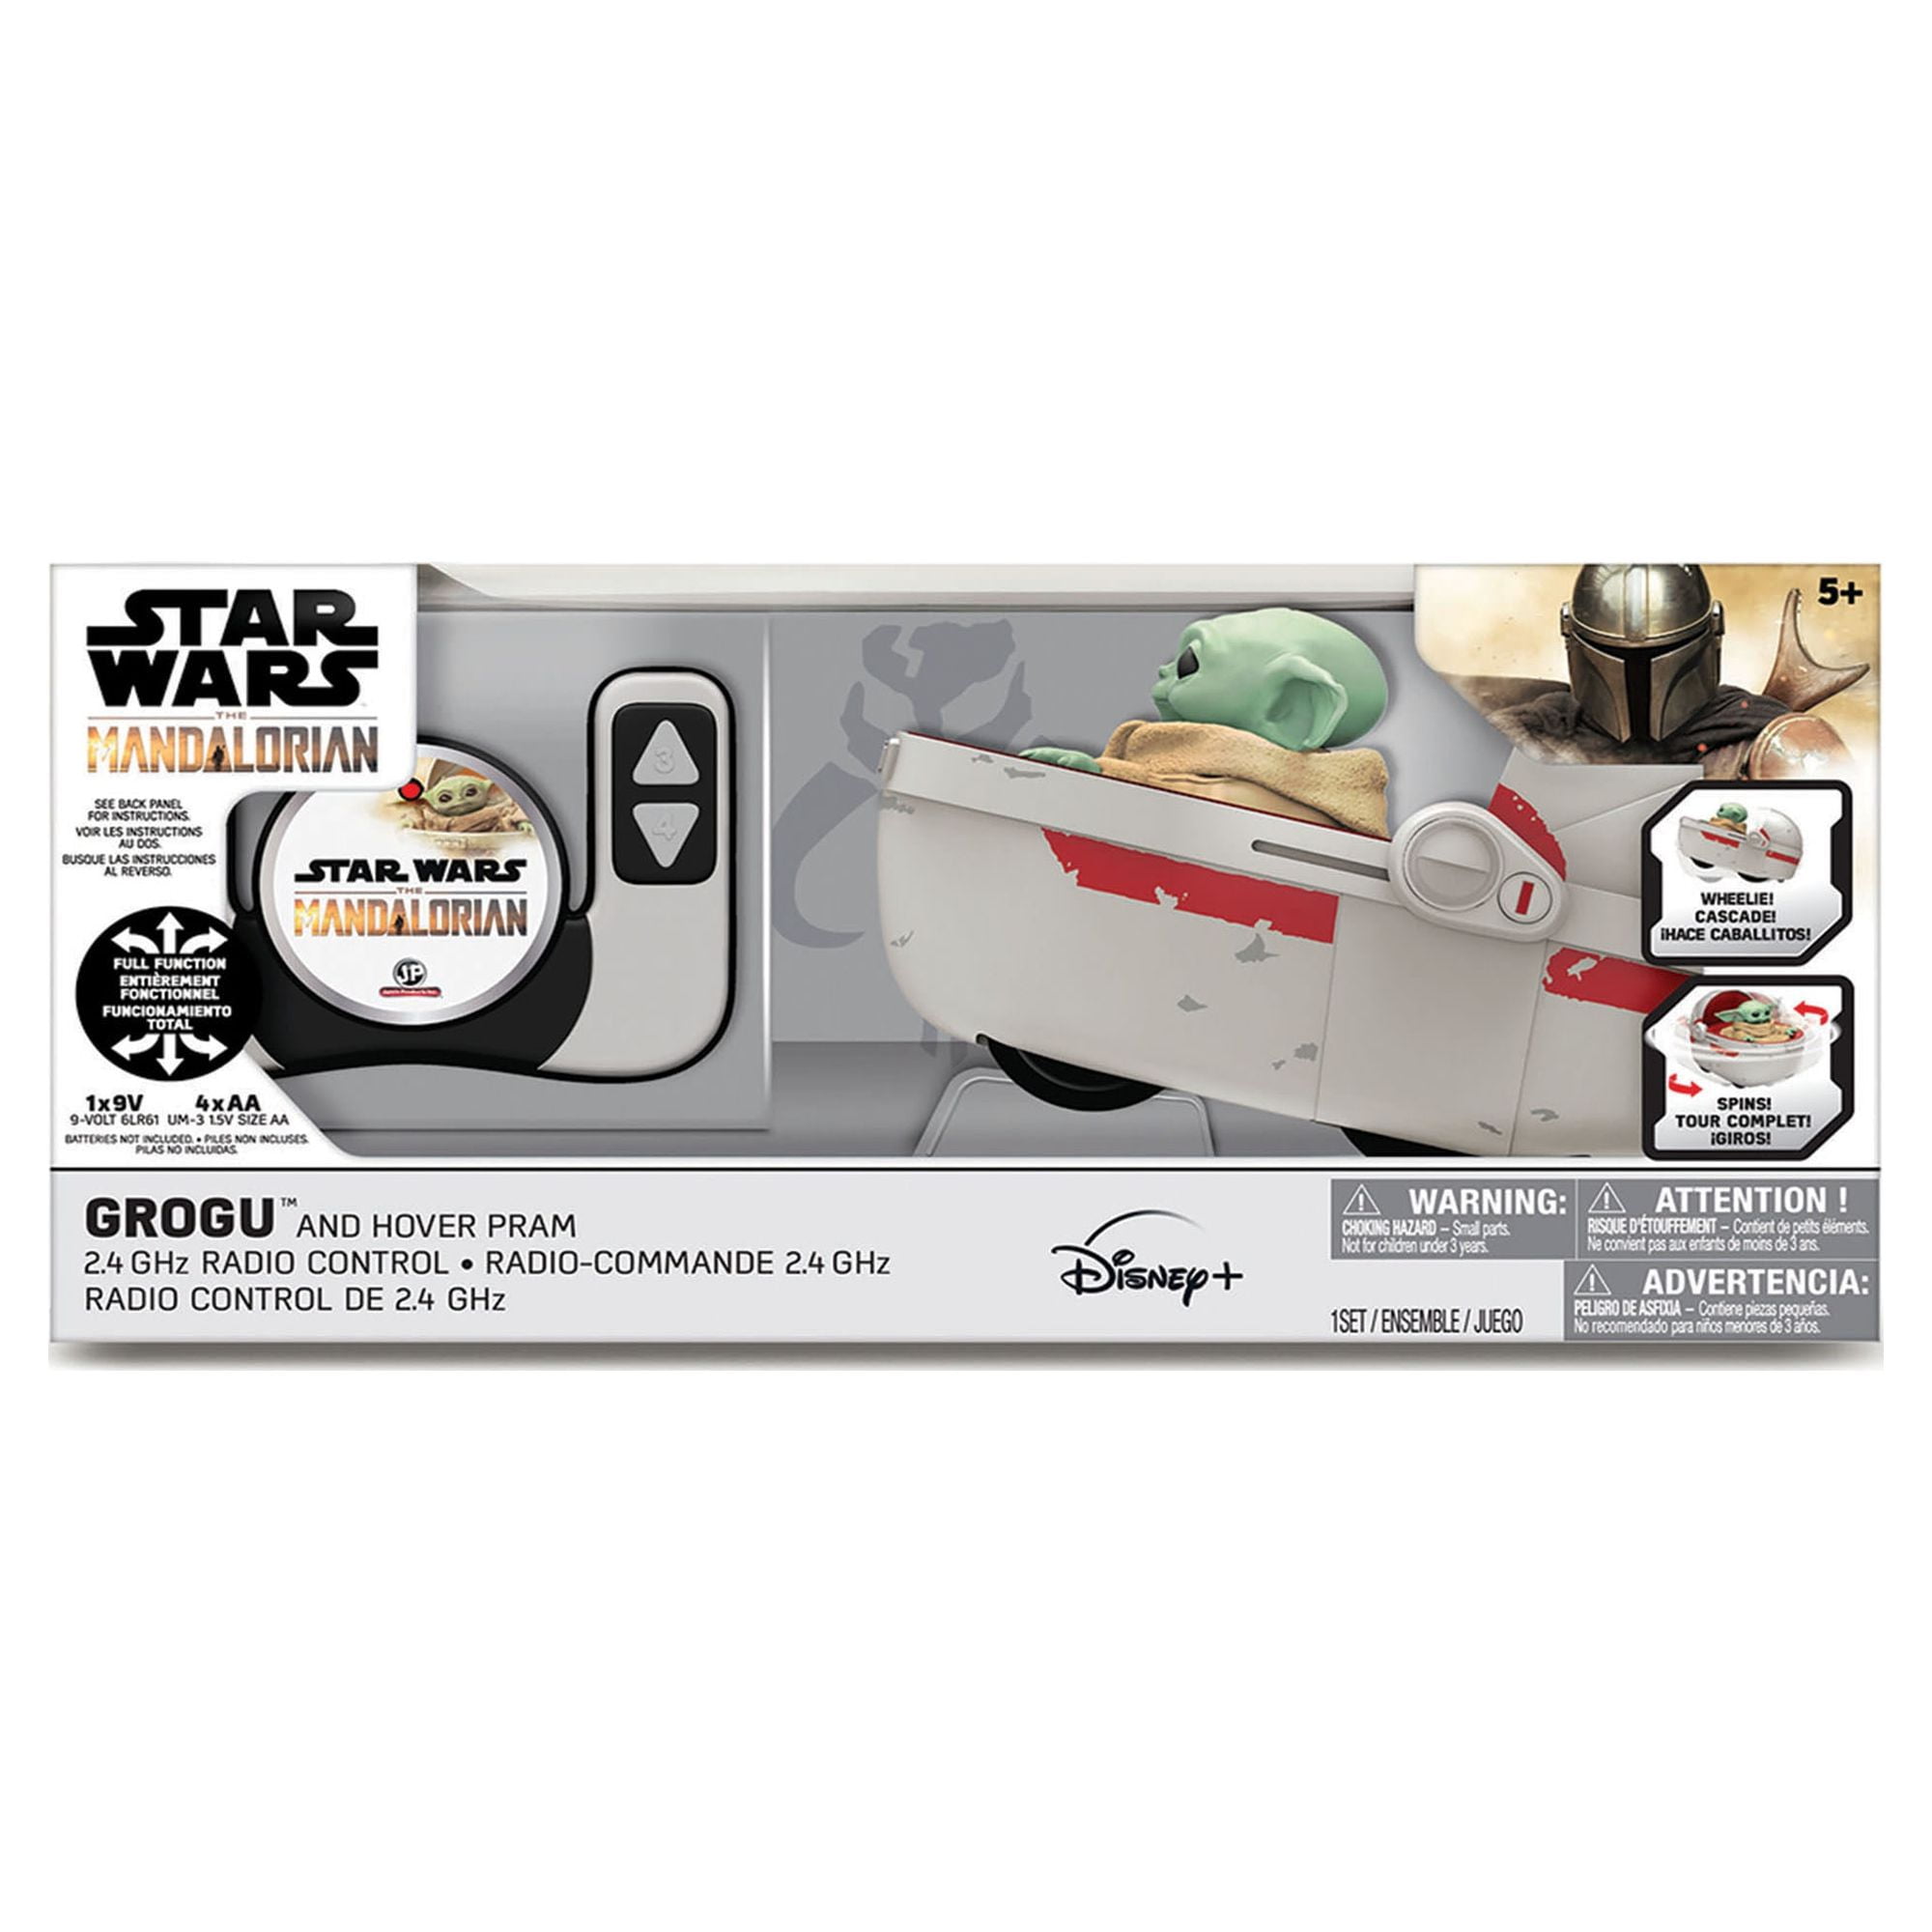 Star Wars Grogu and Hover Pram Toy 6-inch-Scale The Mandalorian Action  Figure, Toys for Kids Ages 4 and Up